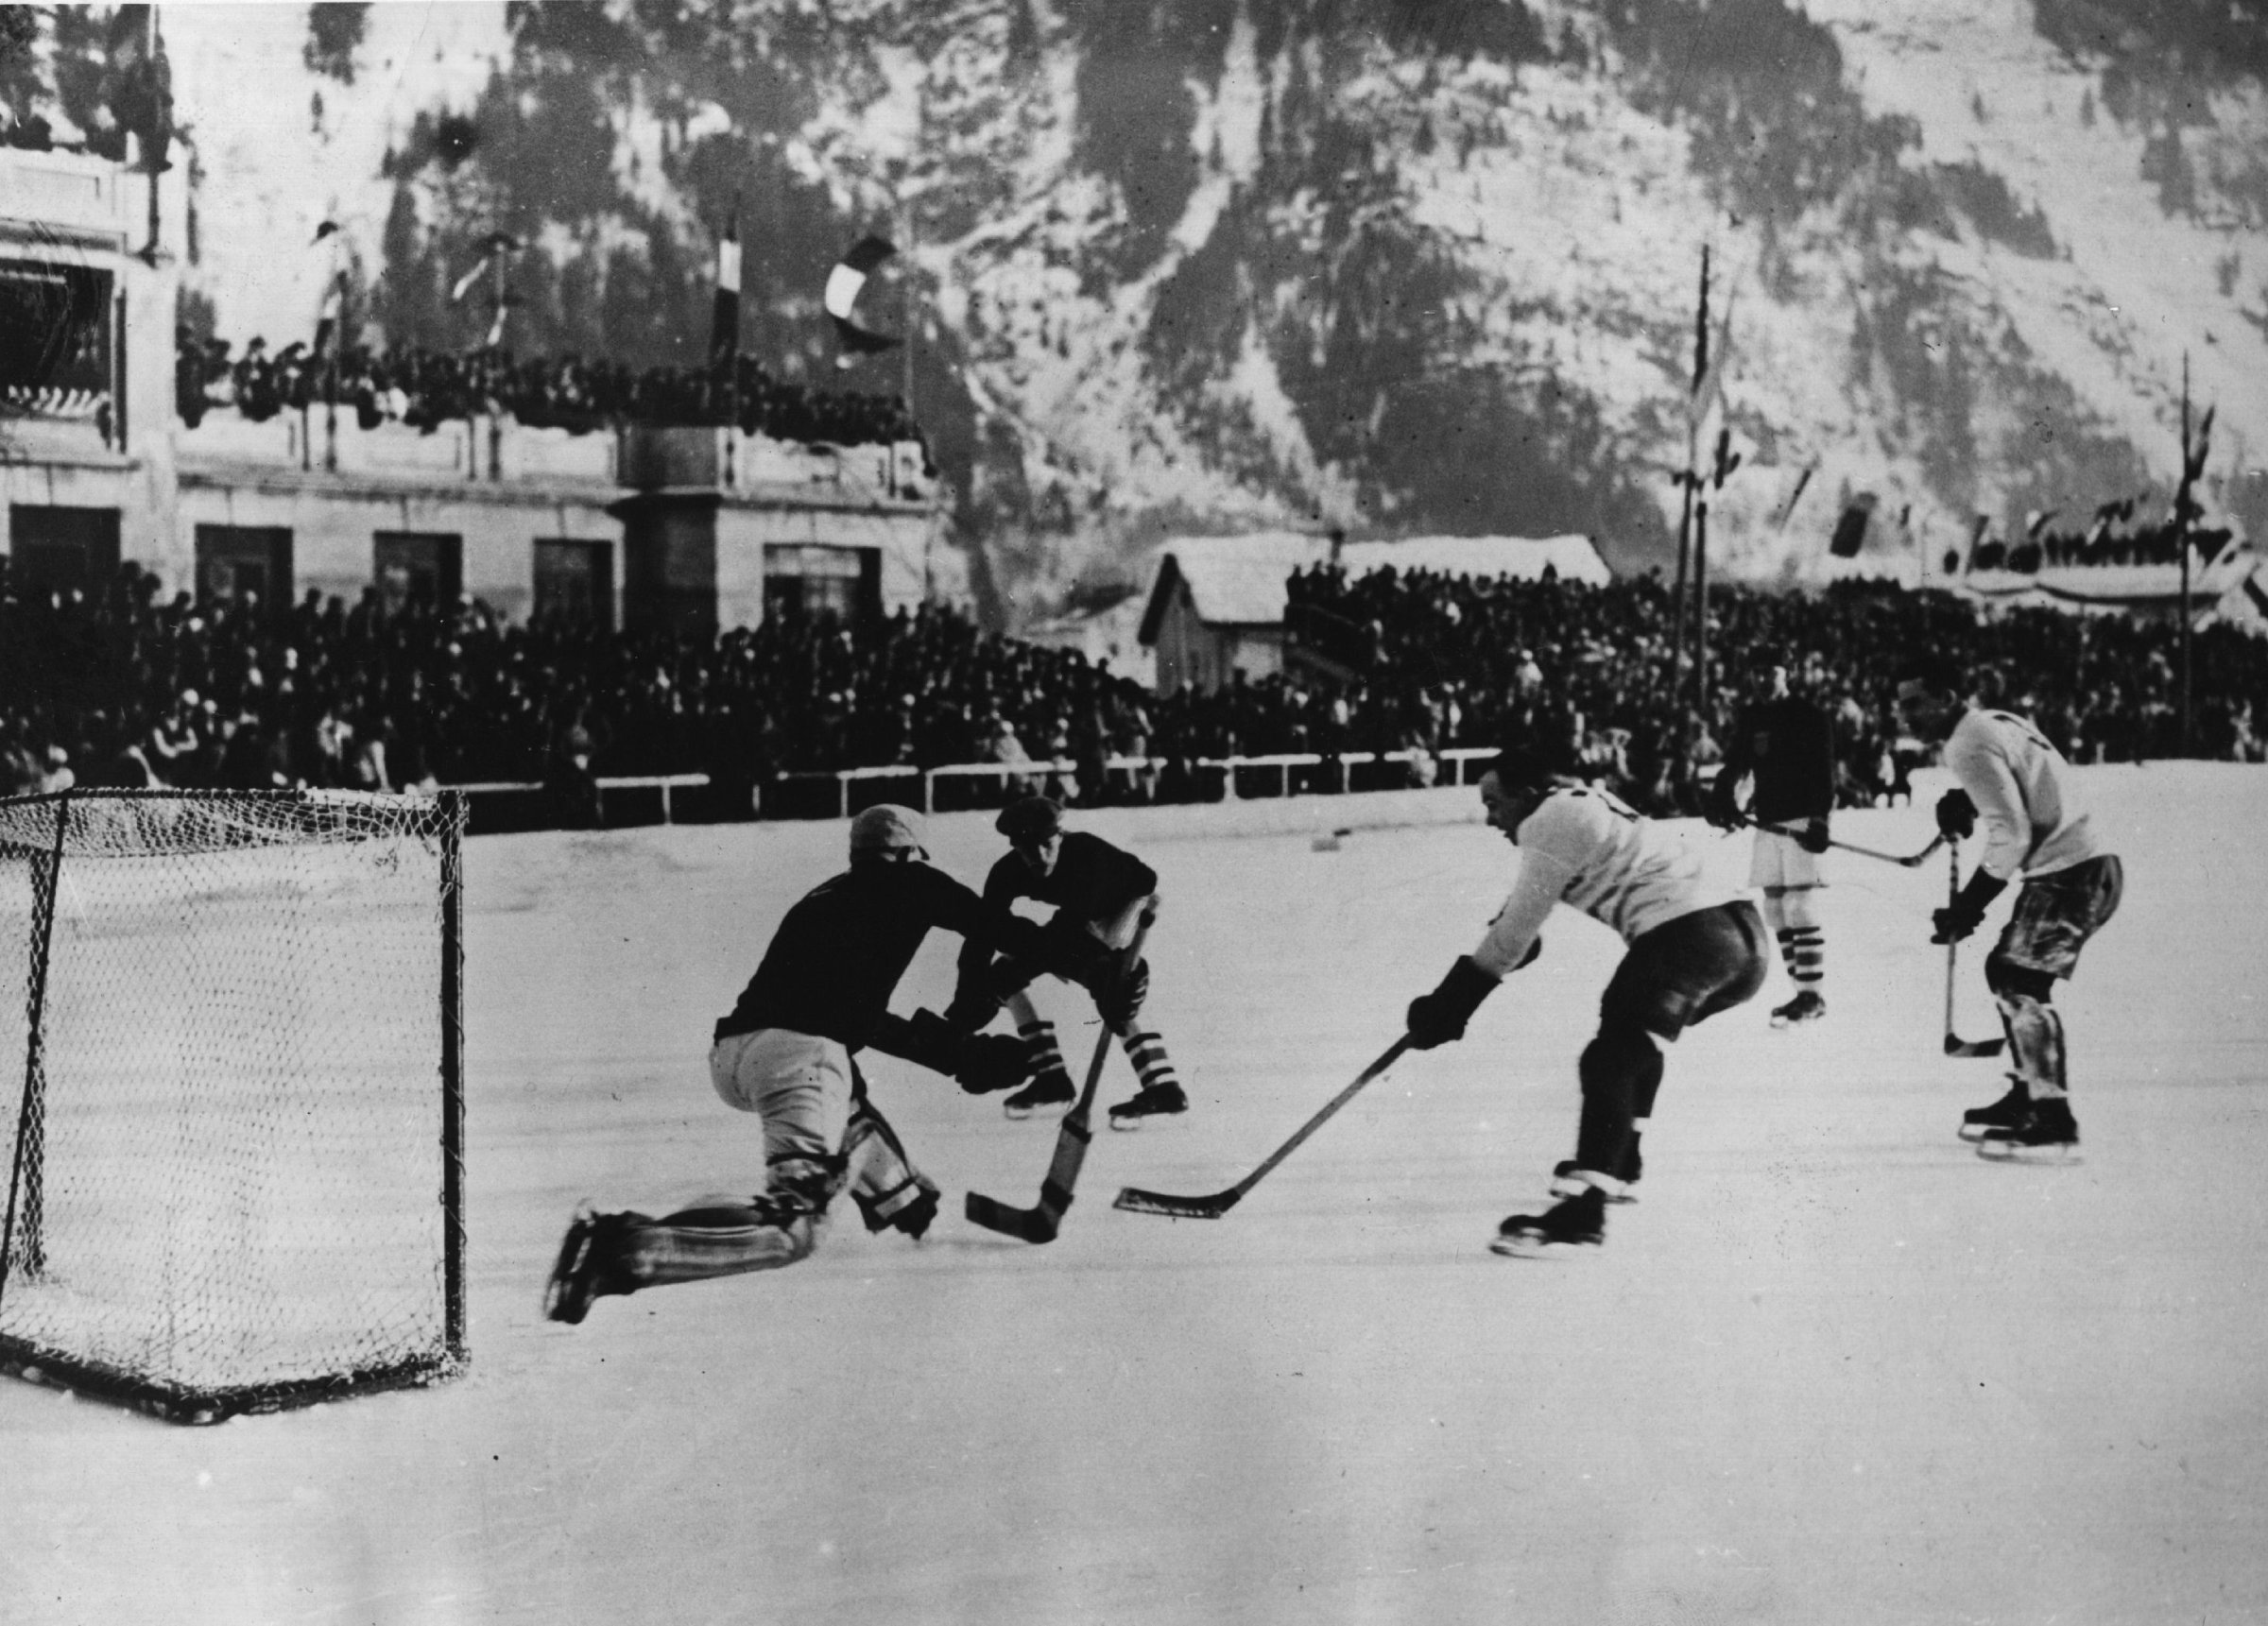 Canada's hockey team competes in the first Winter Olympics in 1924